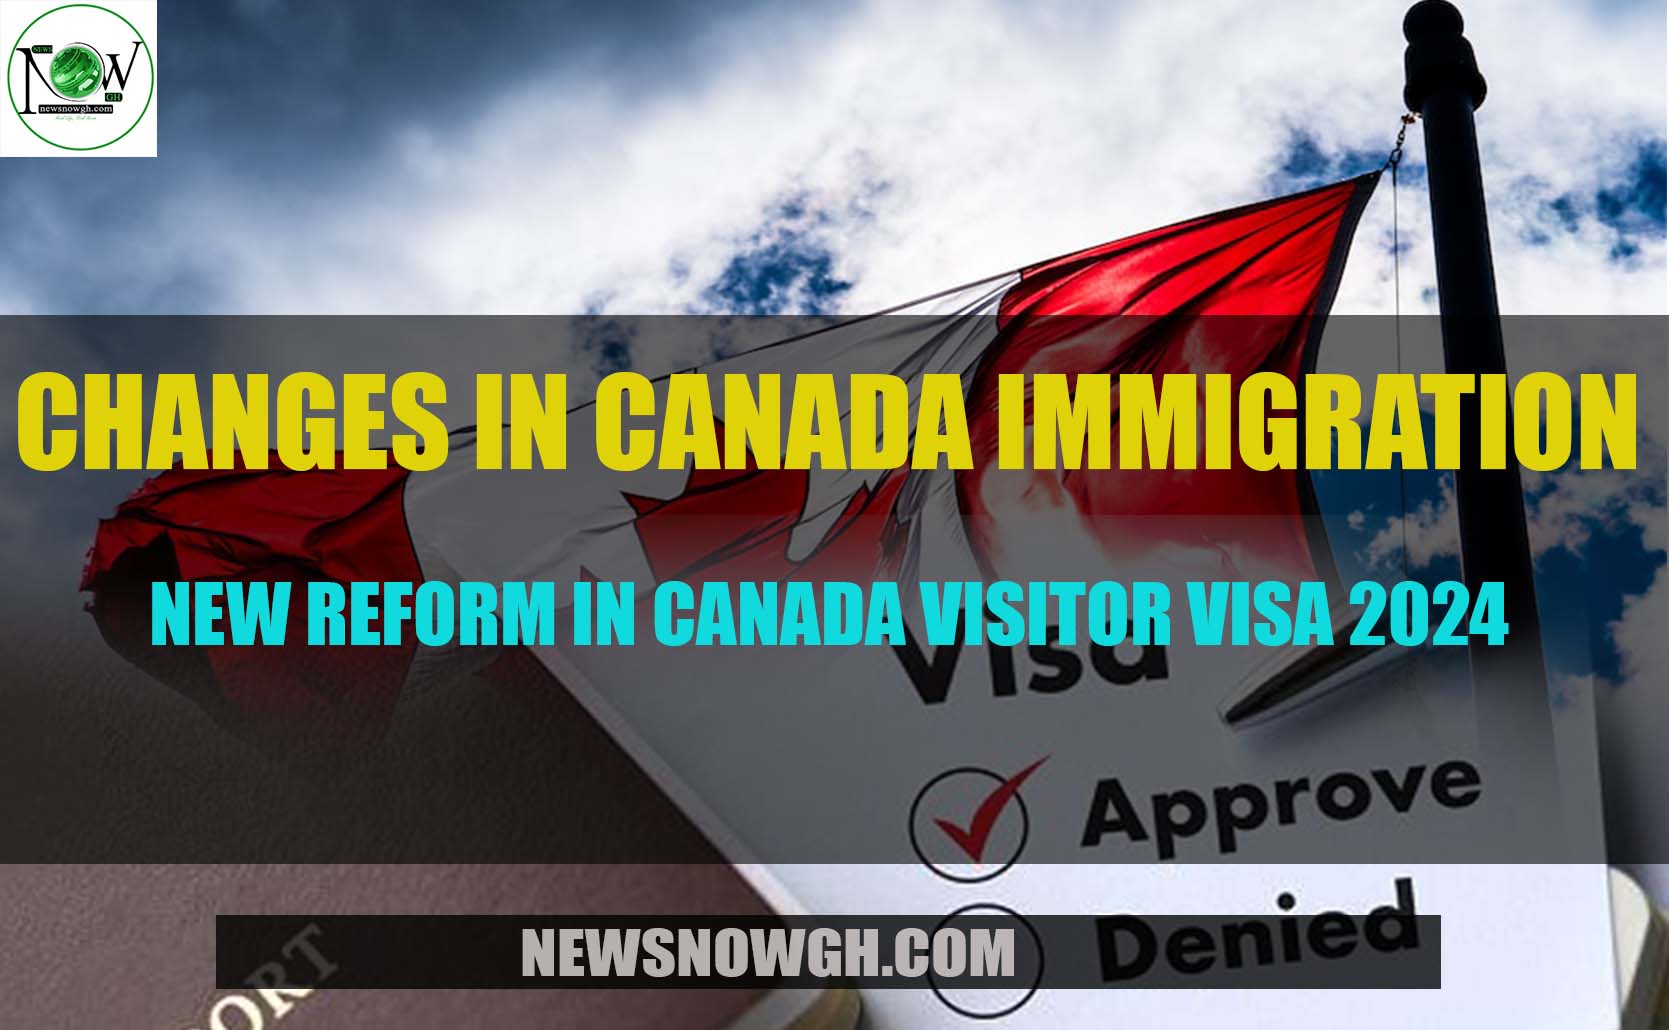 New Reform in Canada Visitor Visa 2024 Canada Immigration